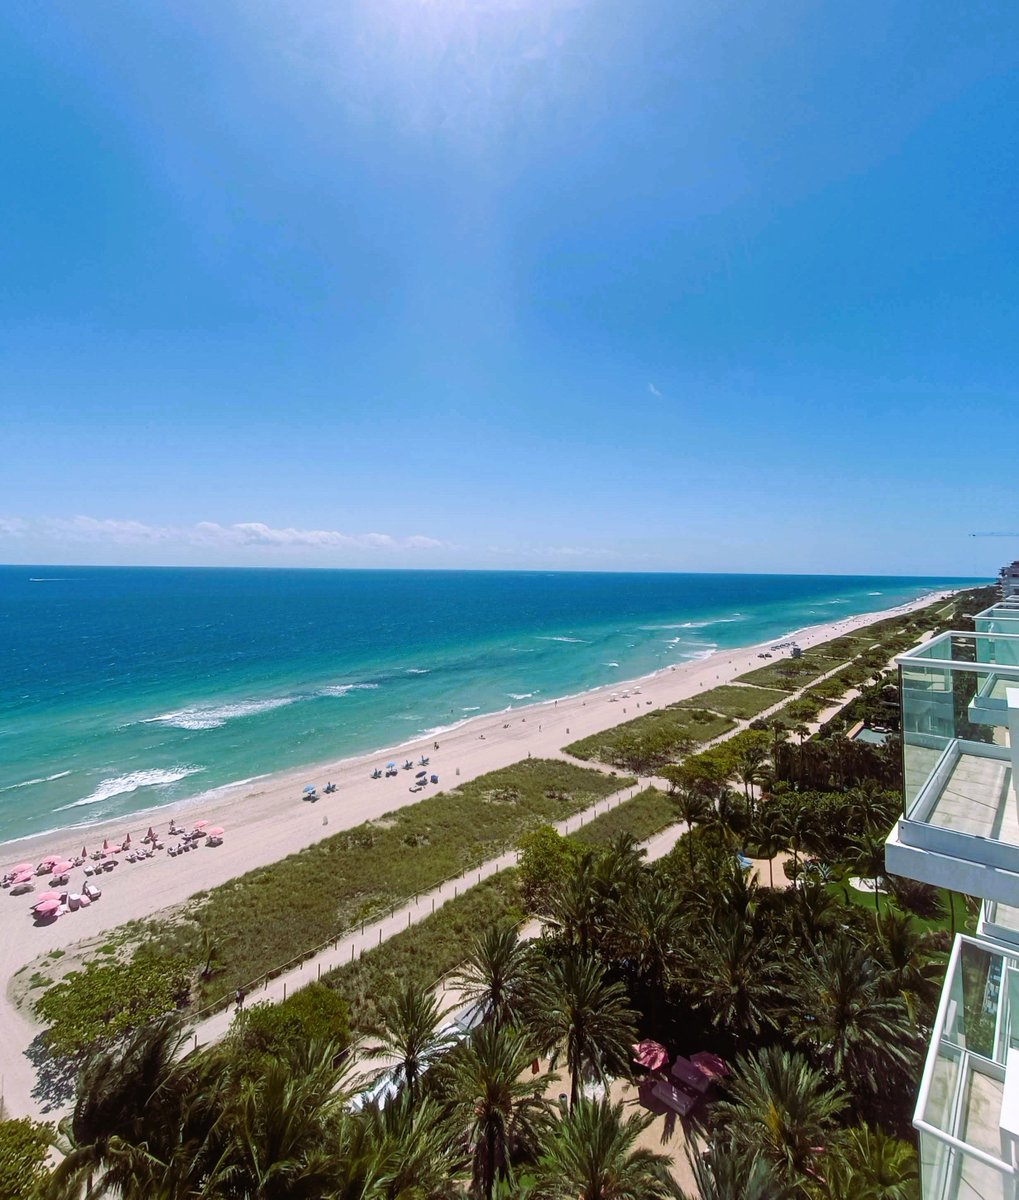 Grand Beach Hotel Surfside, where the ocean meets the sky and all your worries drift away. buff.ly/2QR0tpt #grandsurfside #suitelife #roomviewgoals #roomwithaview #oceanfrontviews #oceanmagic #endlesshorizons #saltlife #seasidedreams #miamivibes #miamigetaway